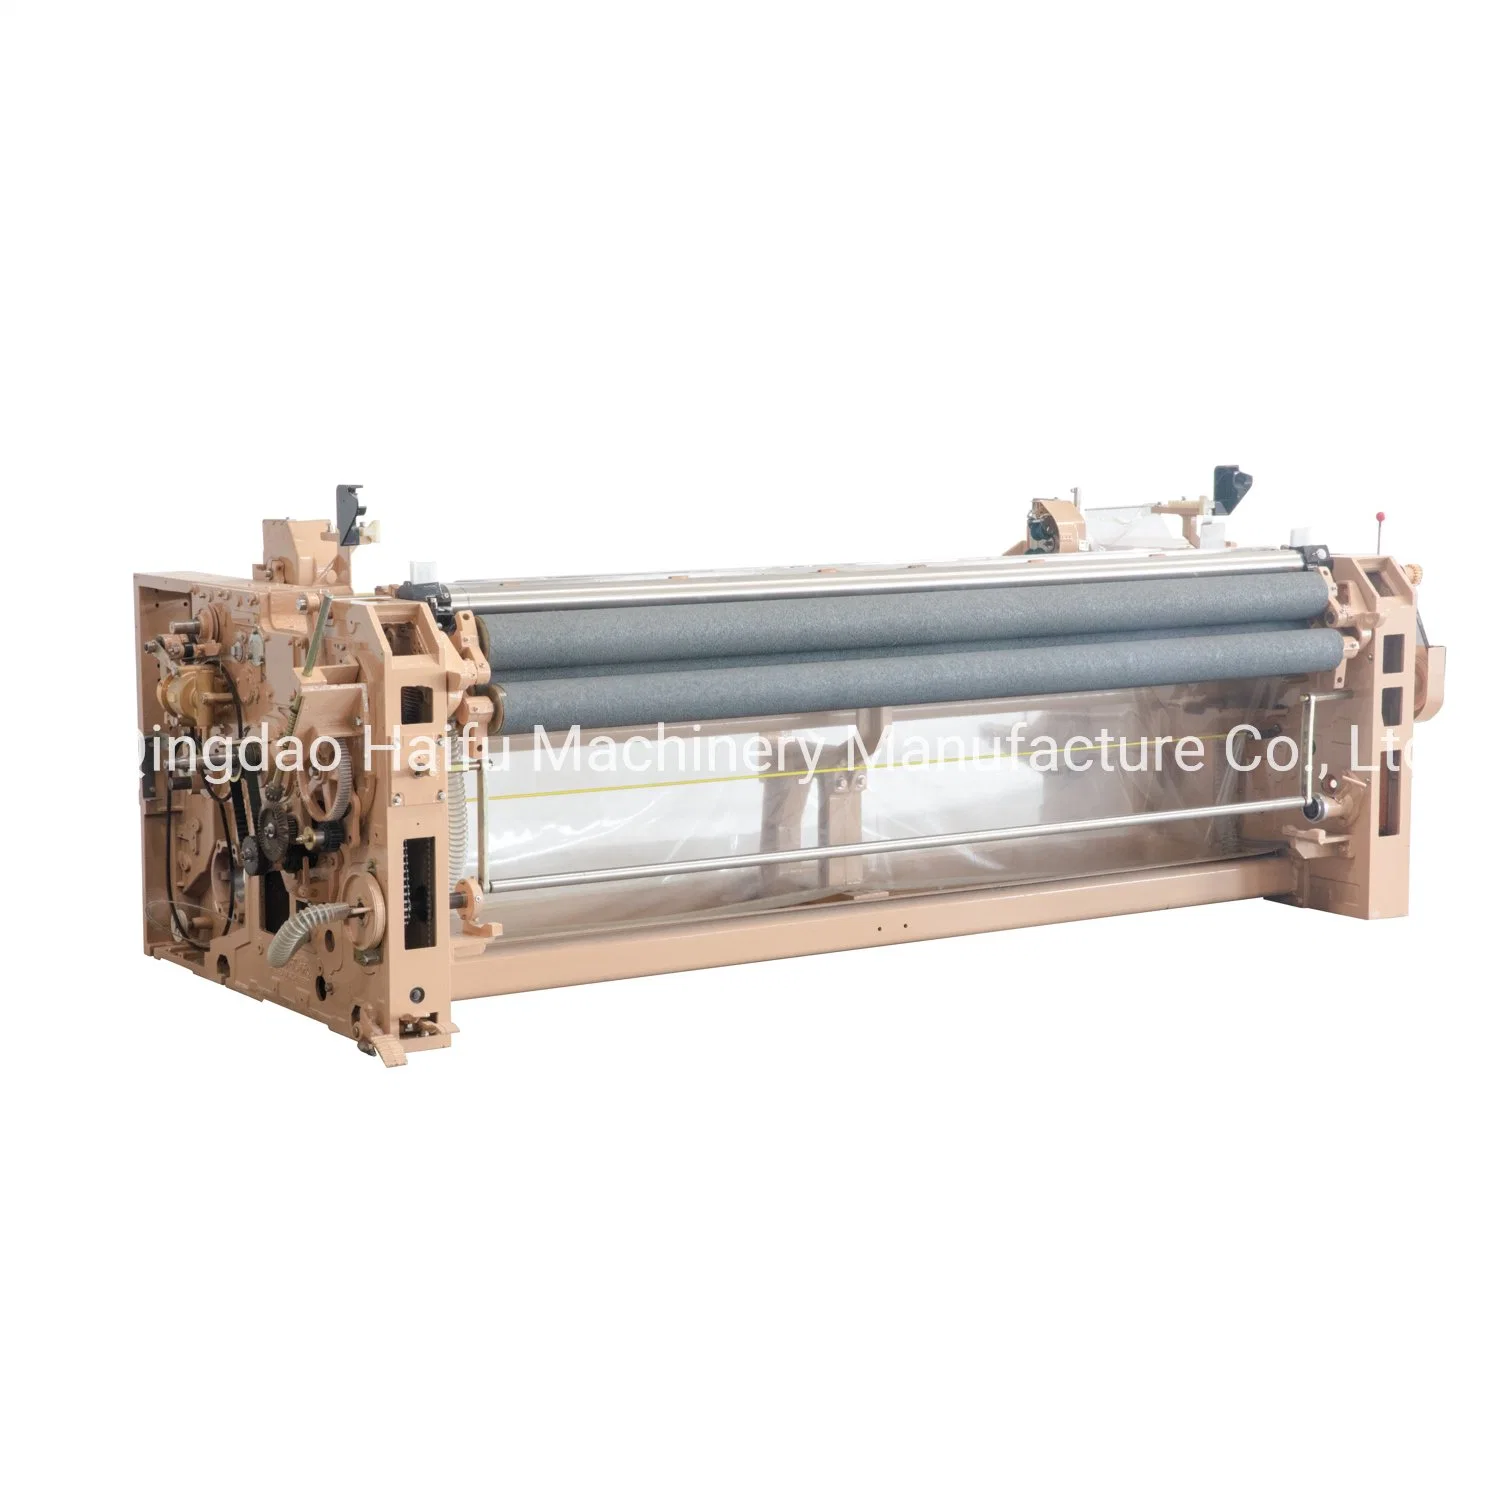 Textile High Speed Water Jet Loom Weaving Machine for Sale